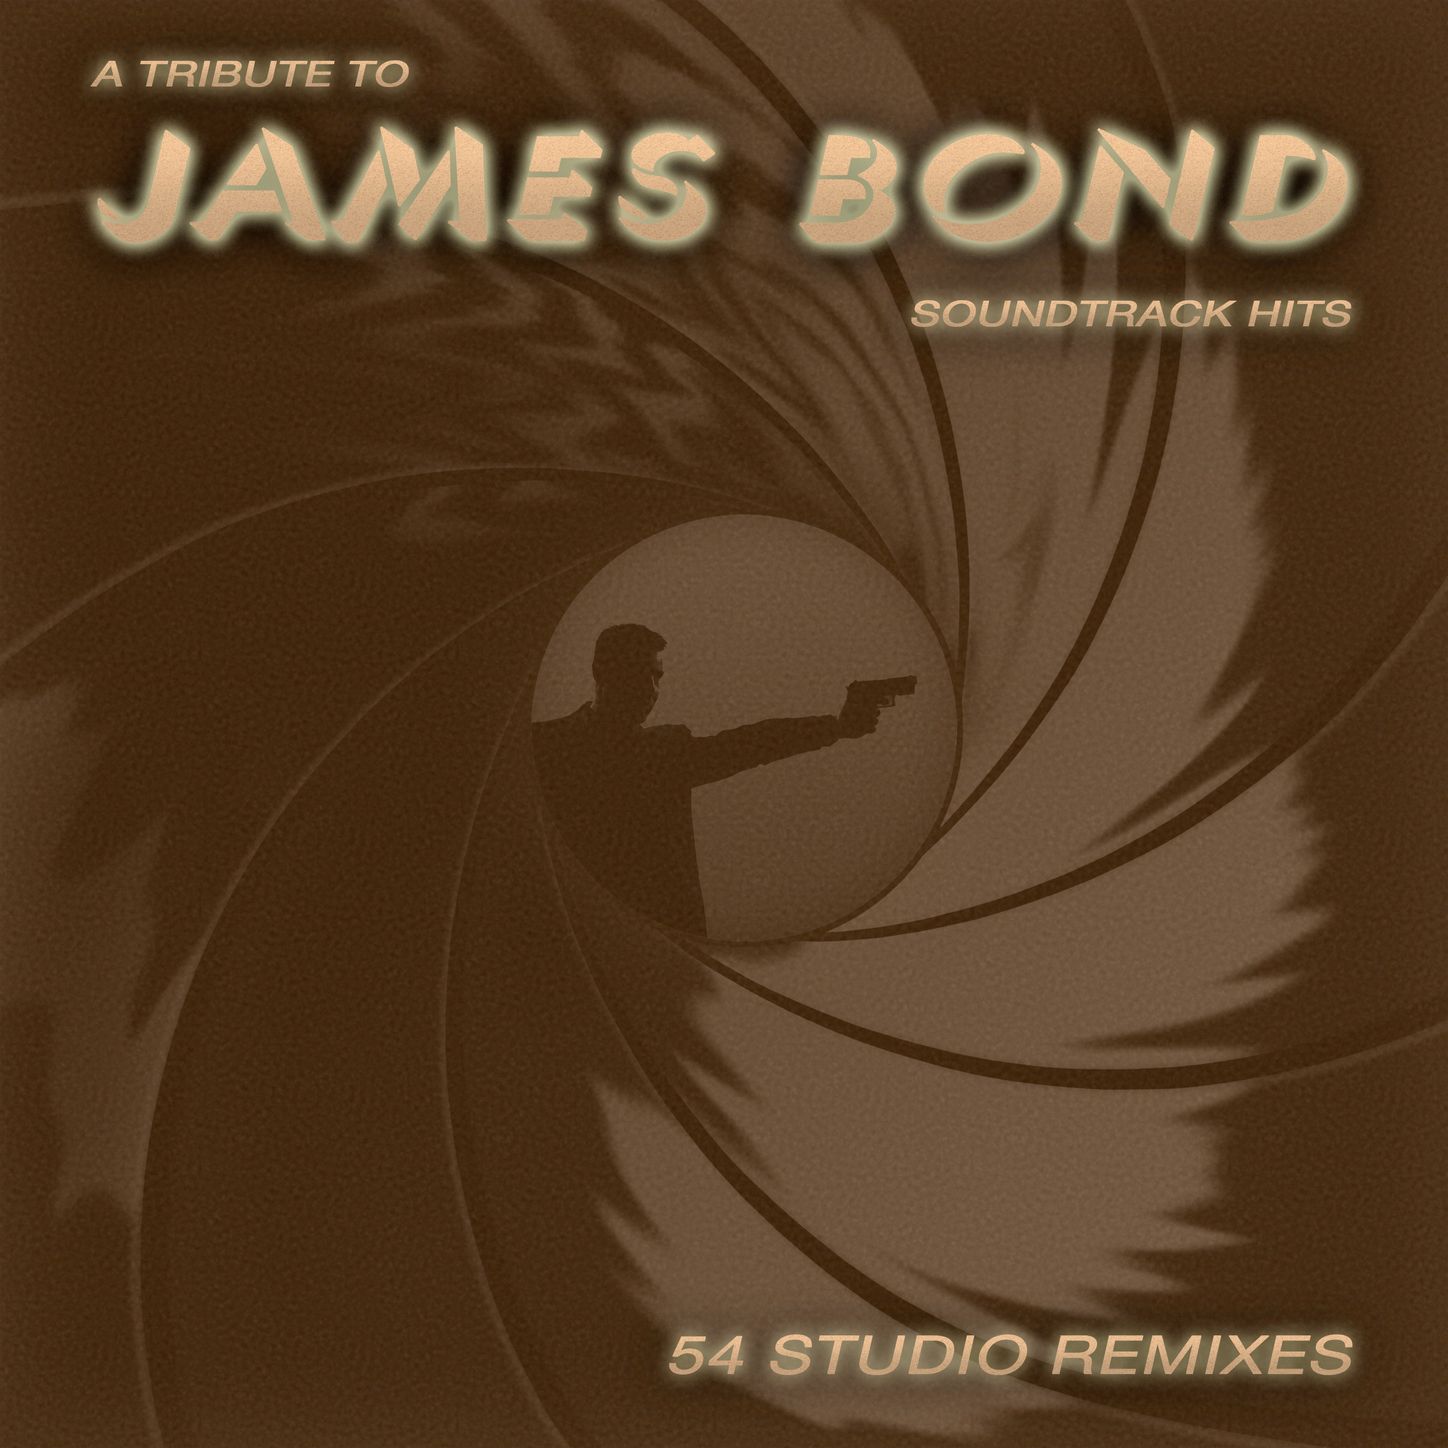 My Name Is Bond, James Bond (Extended Mix)